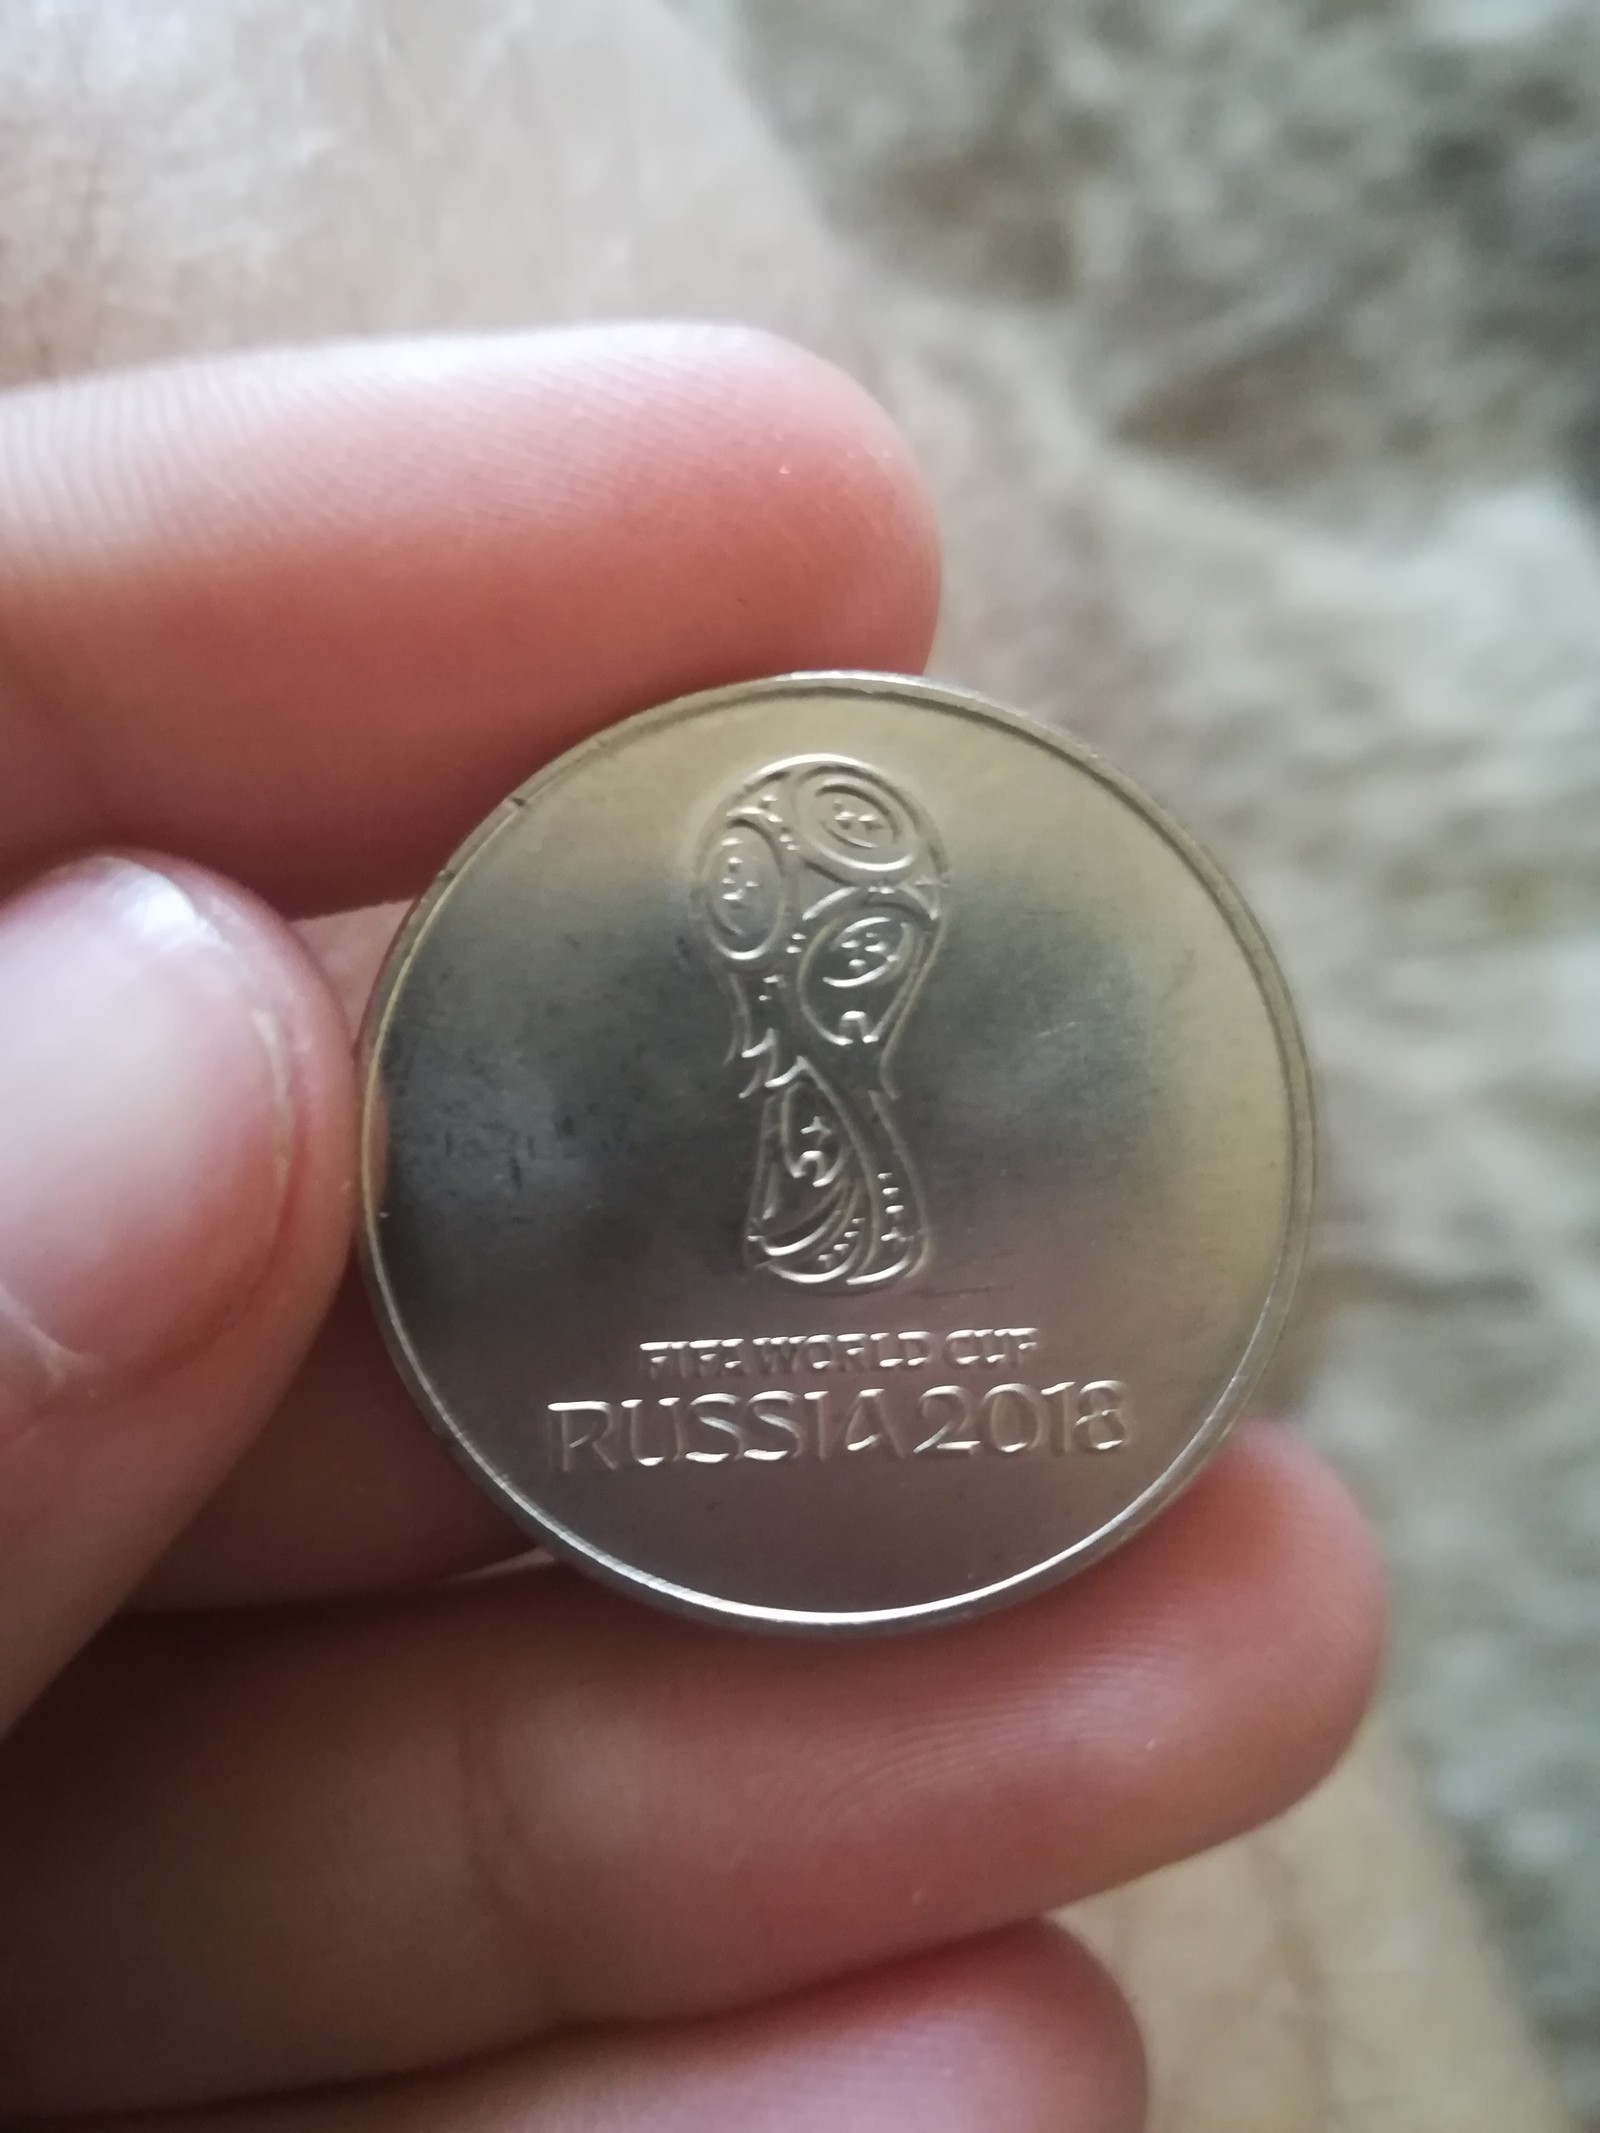 Meet the coin of 25 rubles - 25 rubles, Coin, Longpost, Money